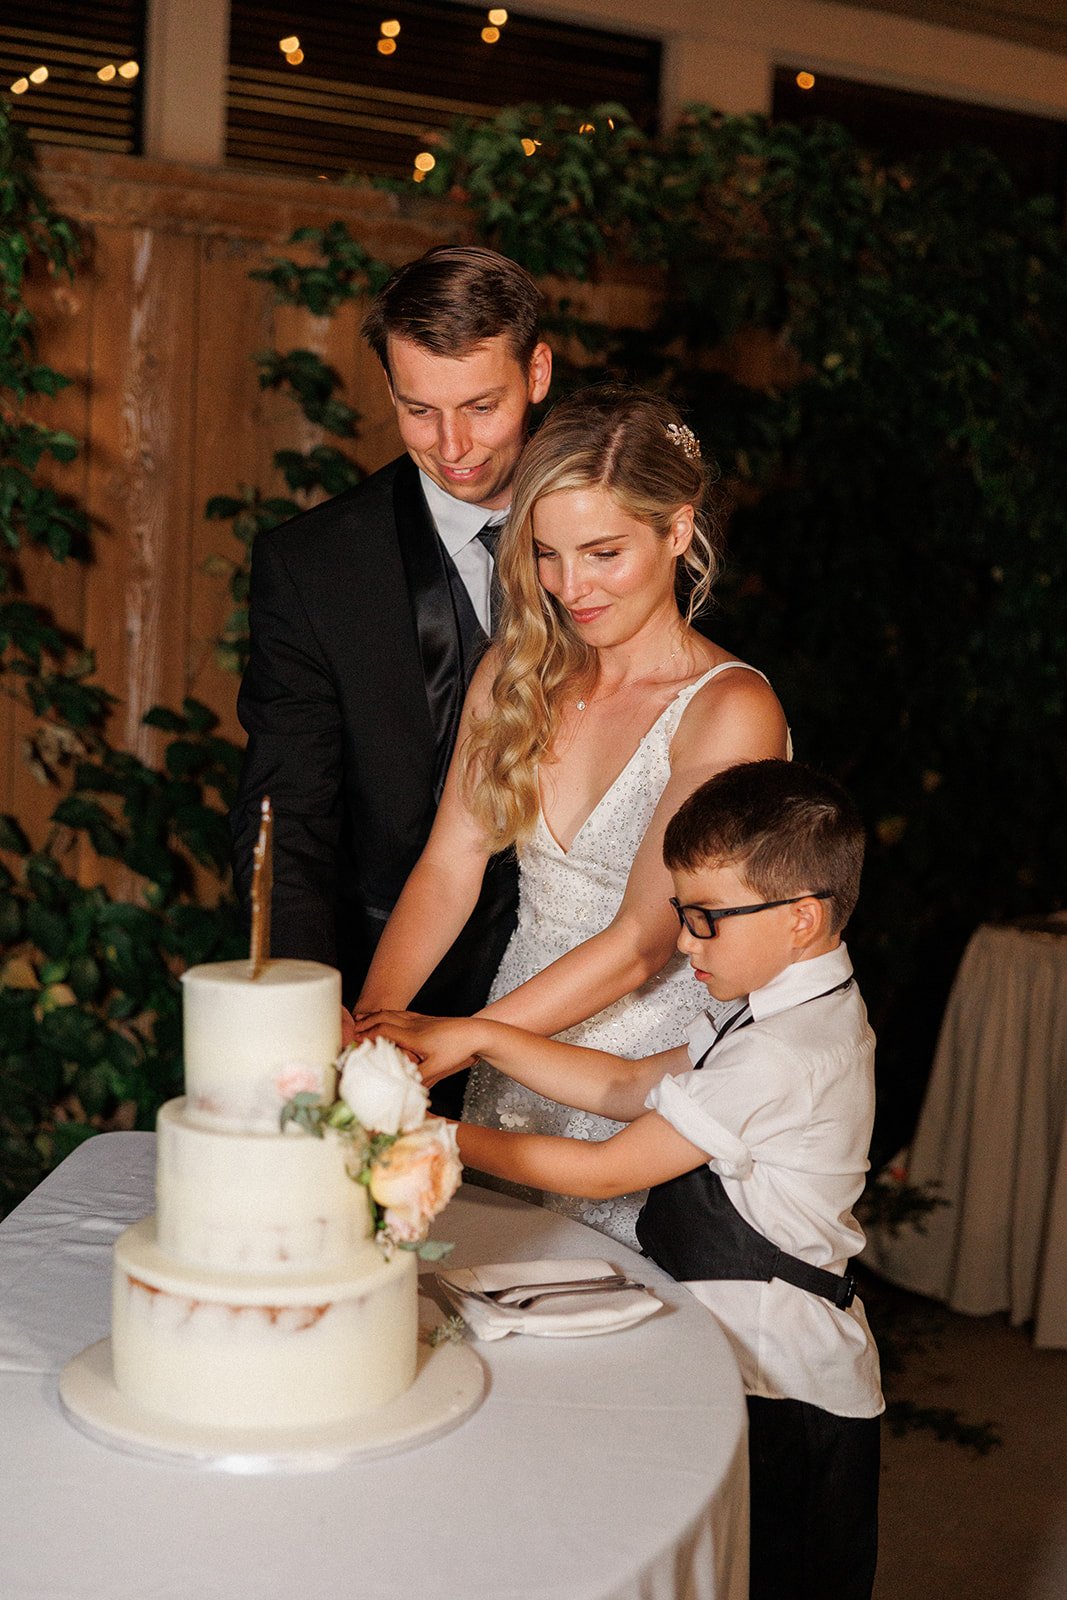 family cake cutting at this bride and groom's wedding reception in southern CA